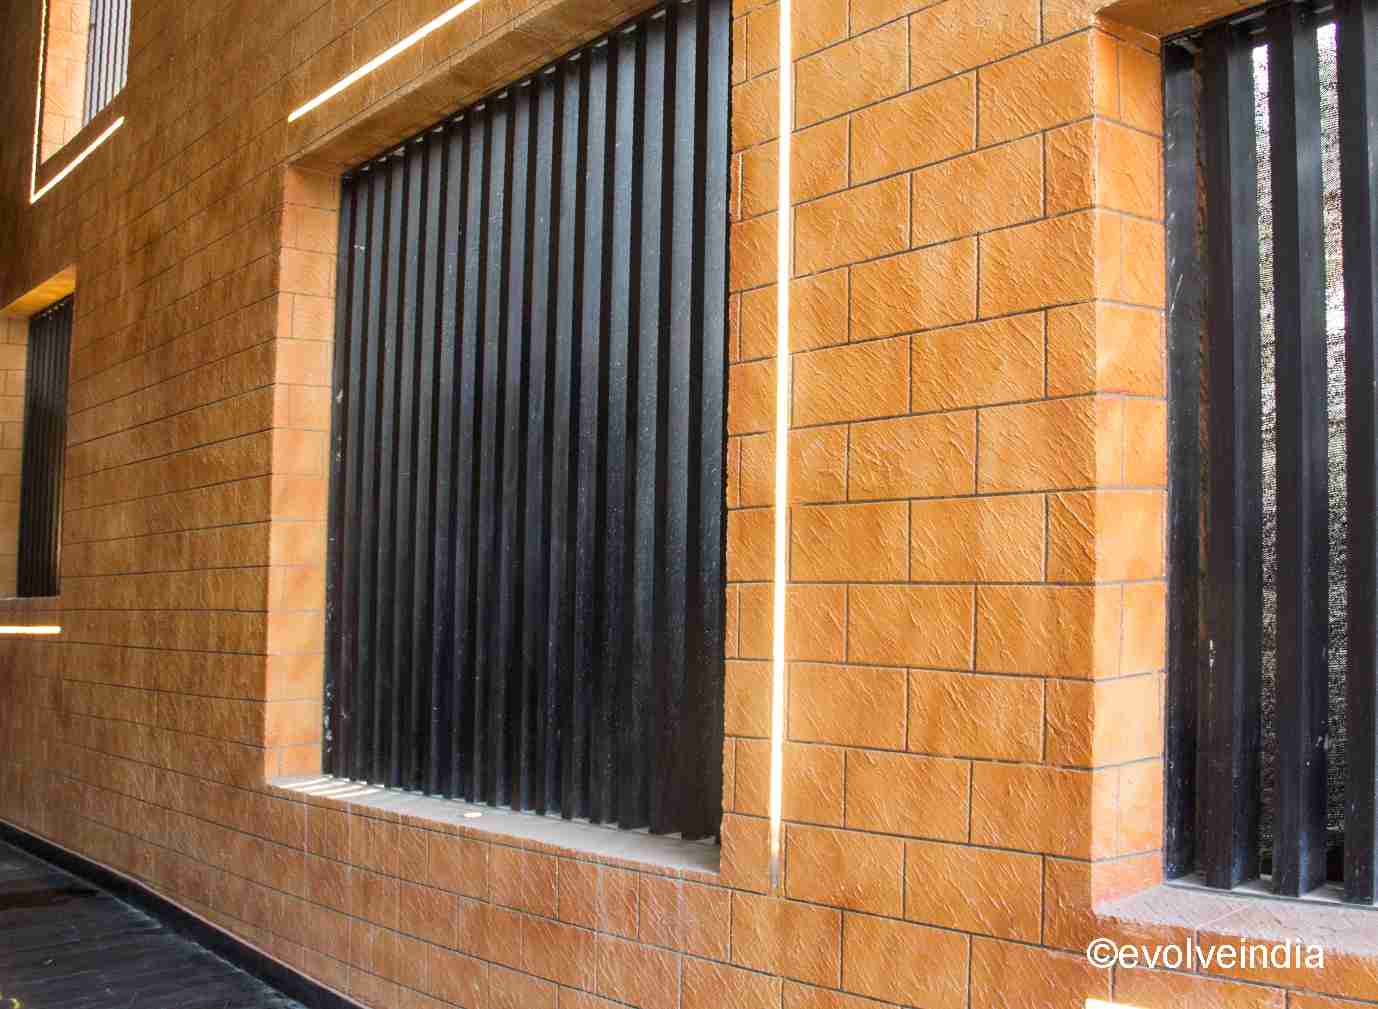 Seamless wall designed using corten steel finish by Evolve India